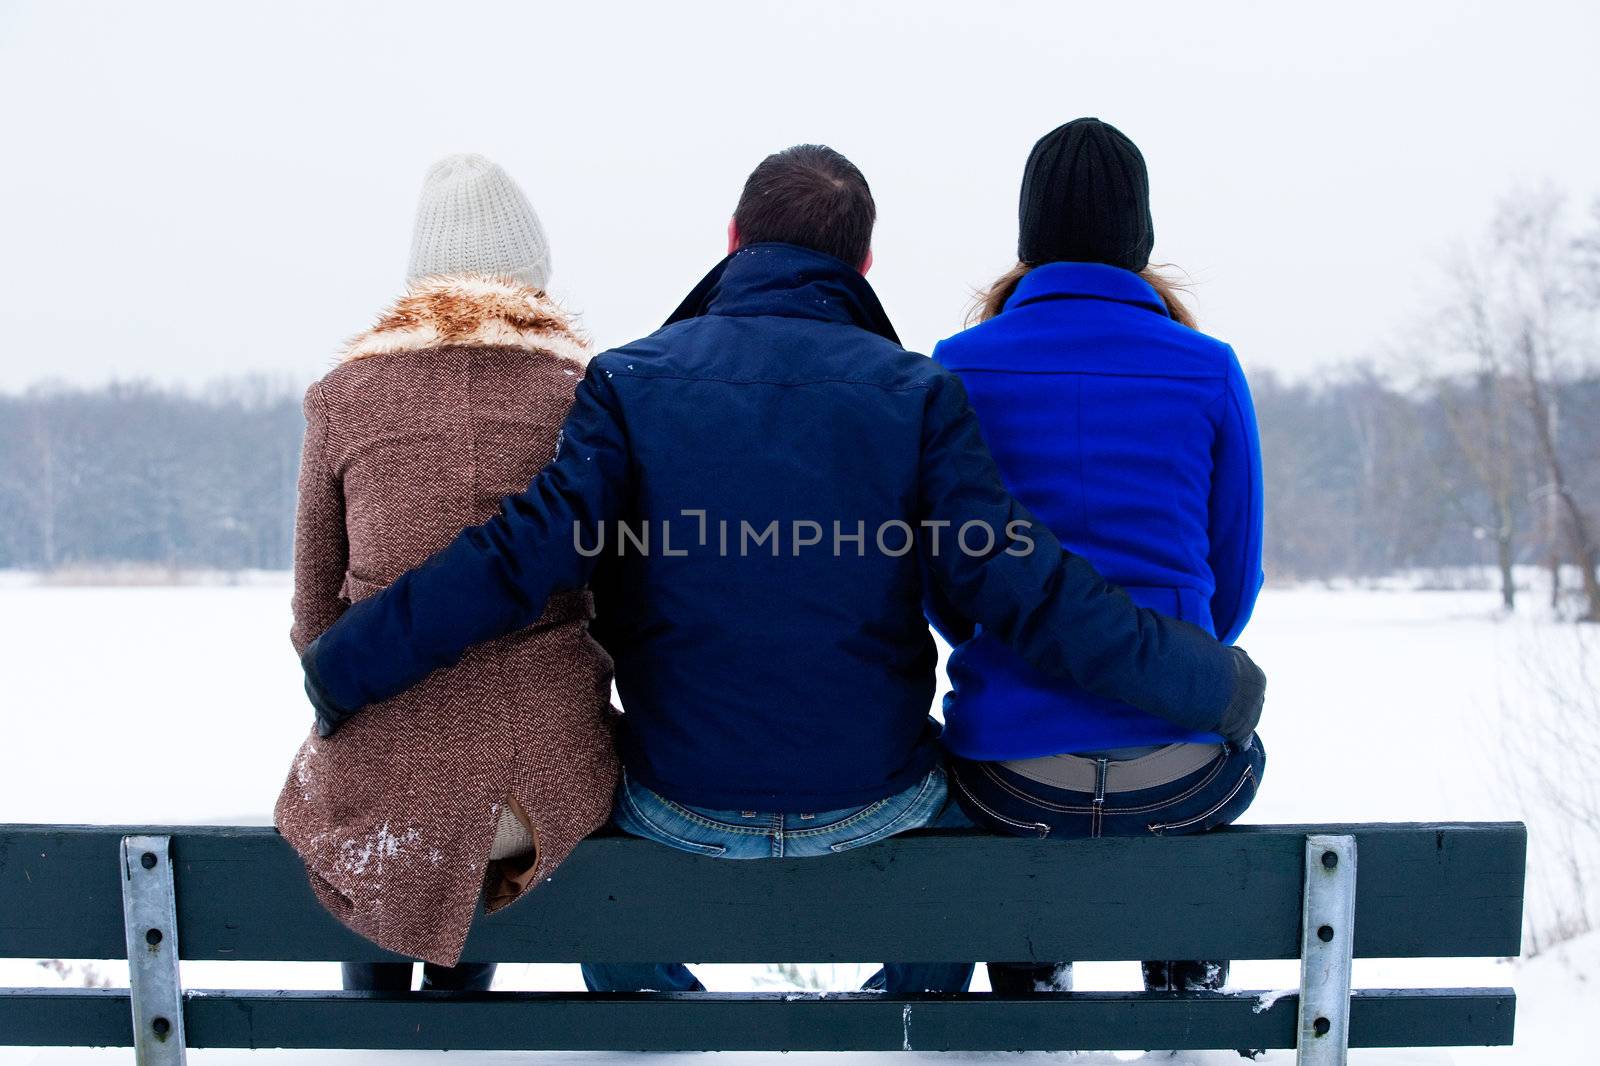 me and my girlfriends in wintertime by DNFStyle